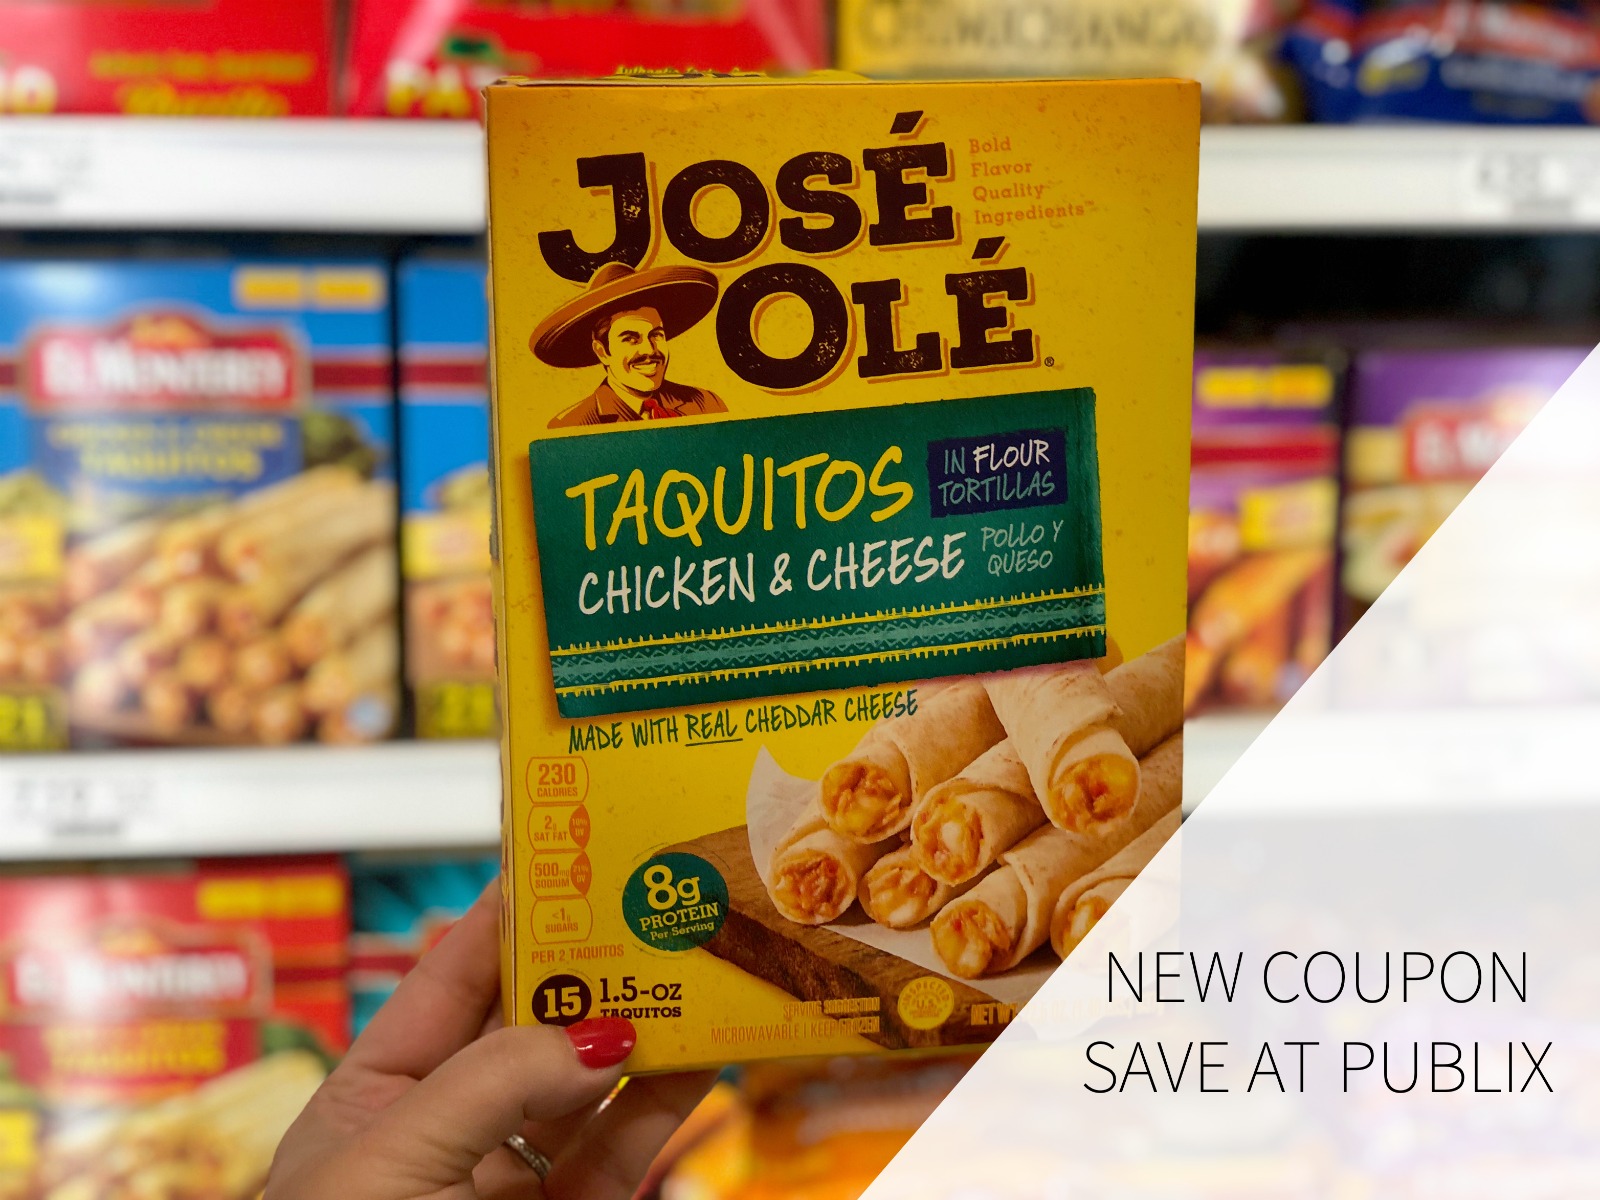 New Coupons To Print - Save On El Monterey, Tai Pei & Jose Ole on I Heart Publix